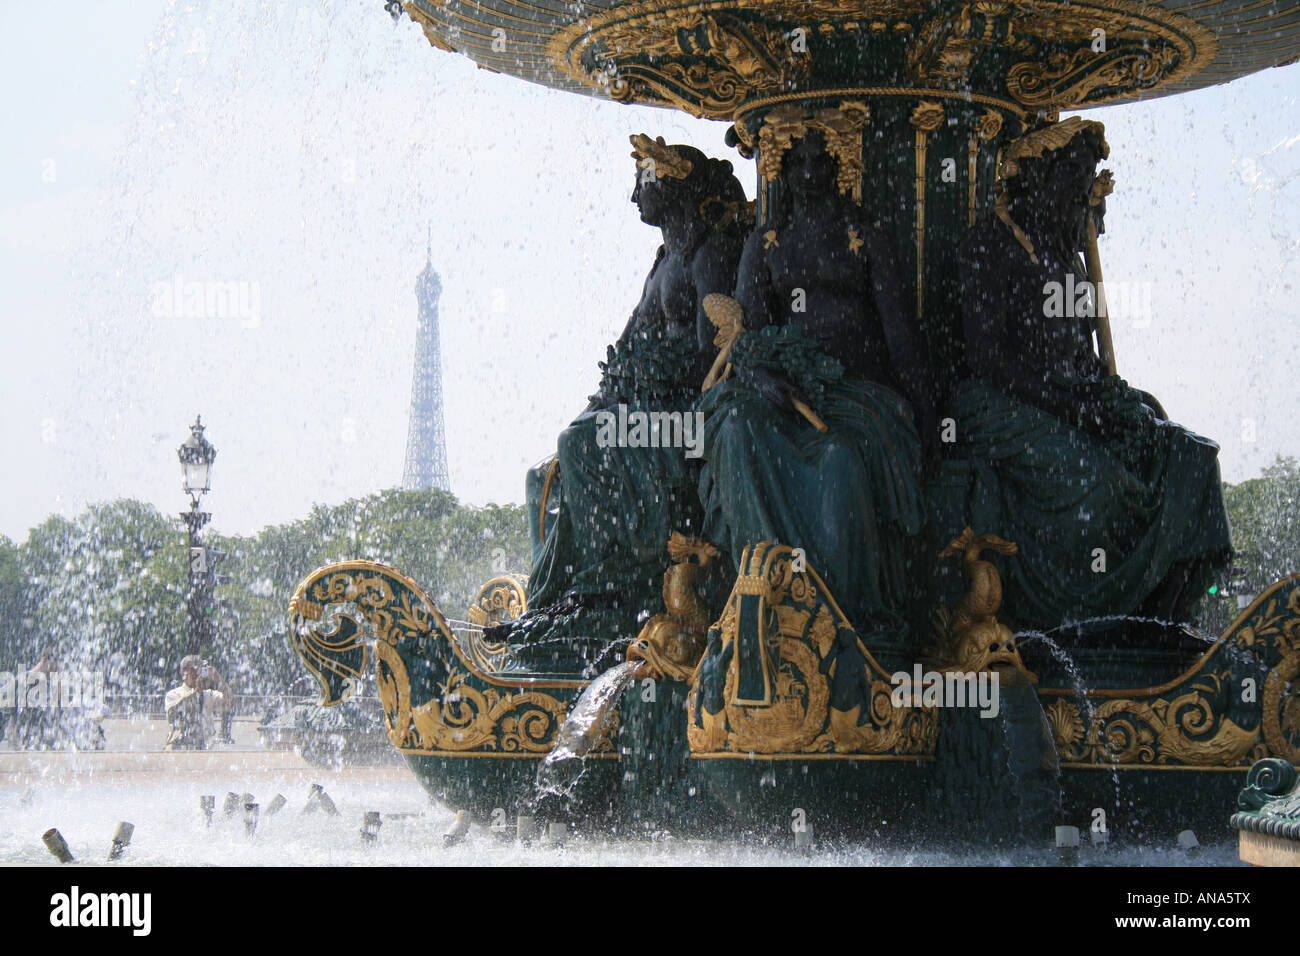 Fountains and statues on the Place de la Concorde with Eiffel Tower, Paris Stock Photo